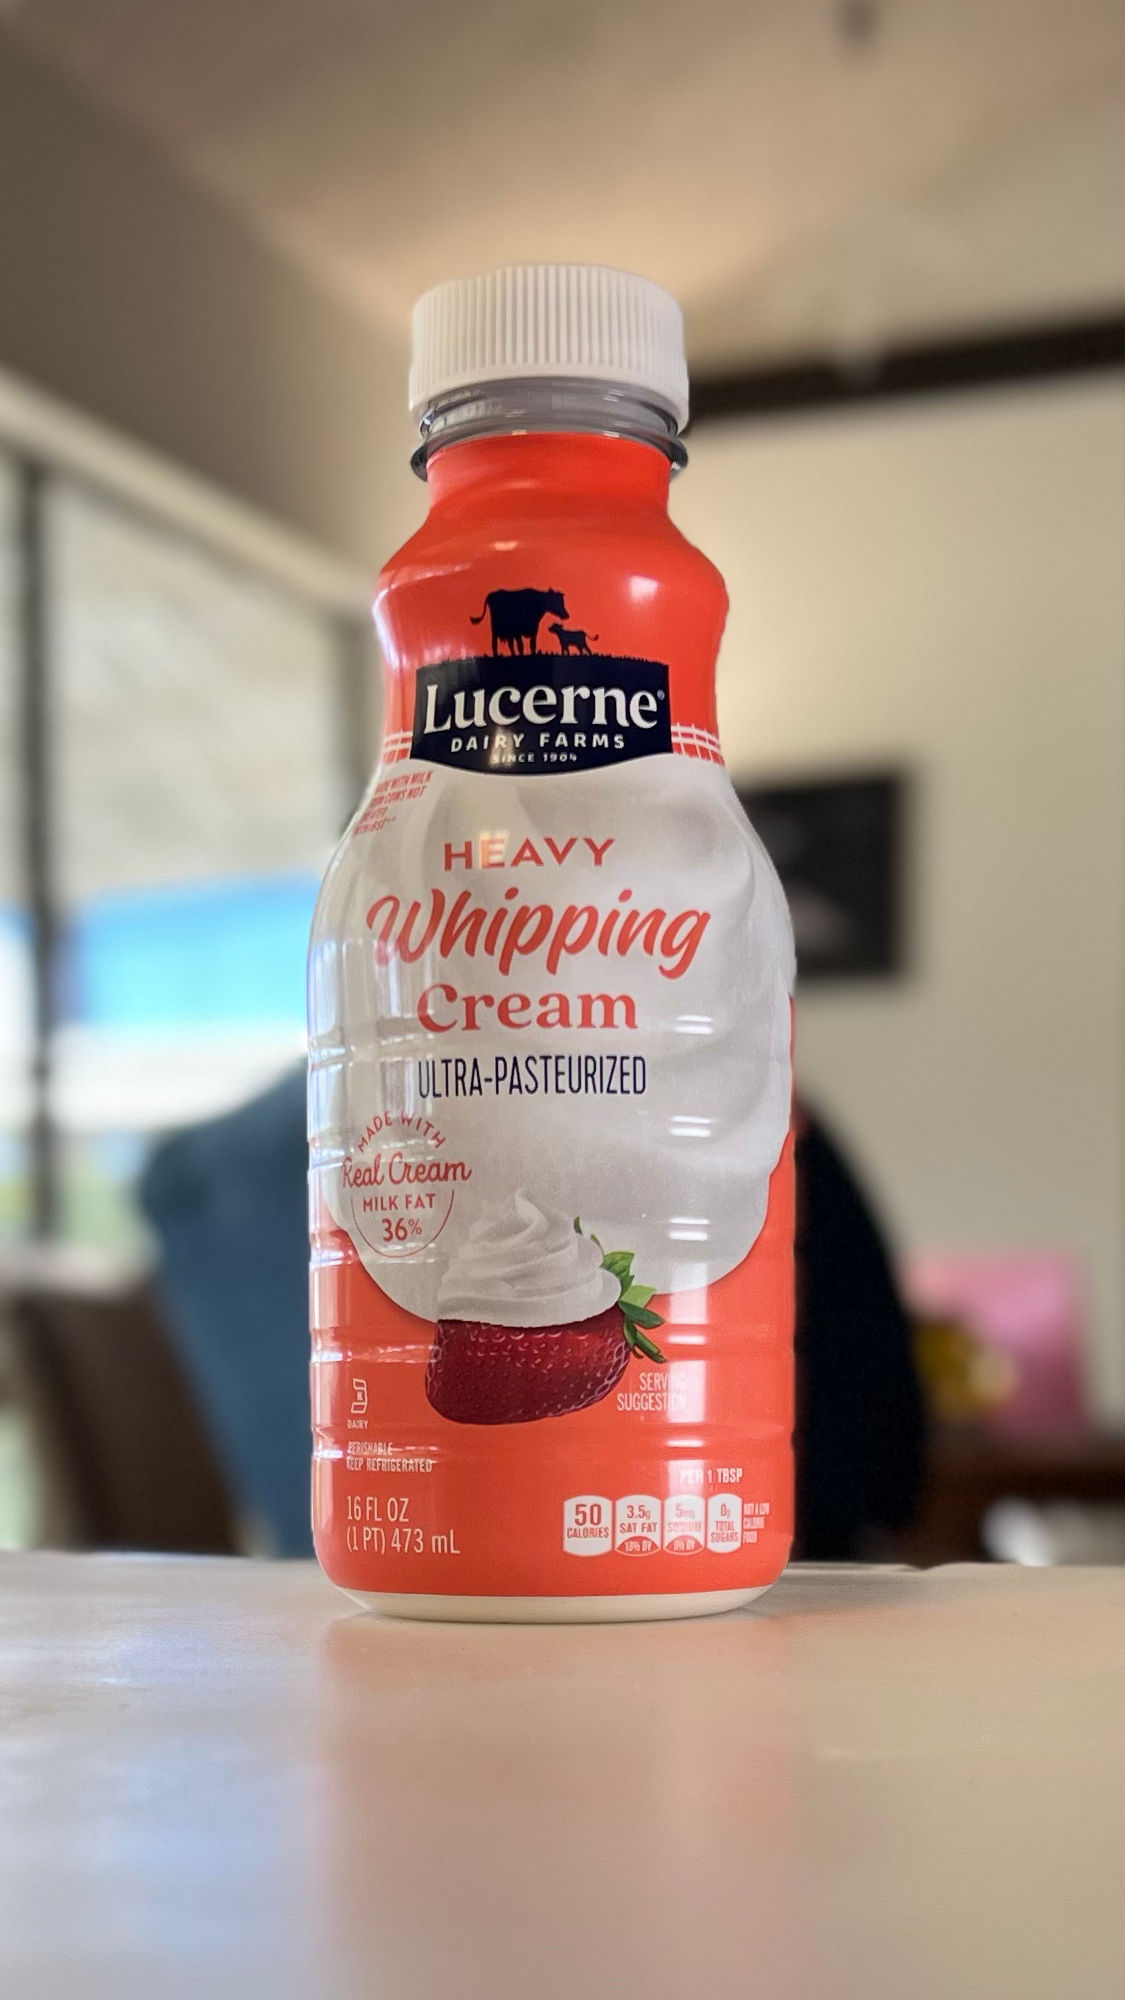 Heavy Whipping Cream Lucerne